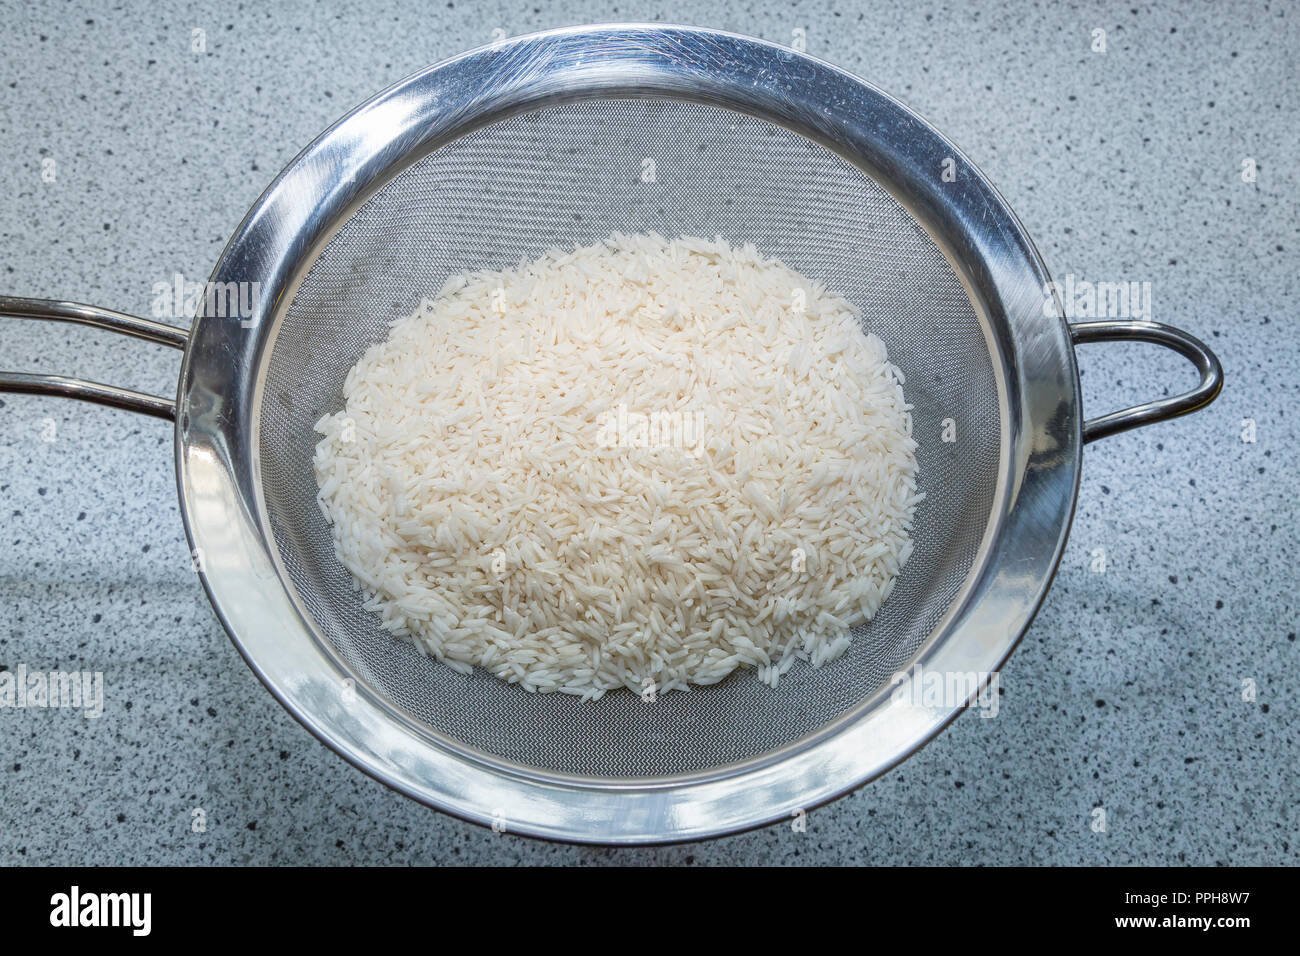 Cooking rice Stock Photo